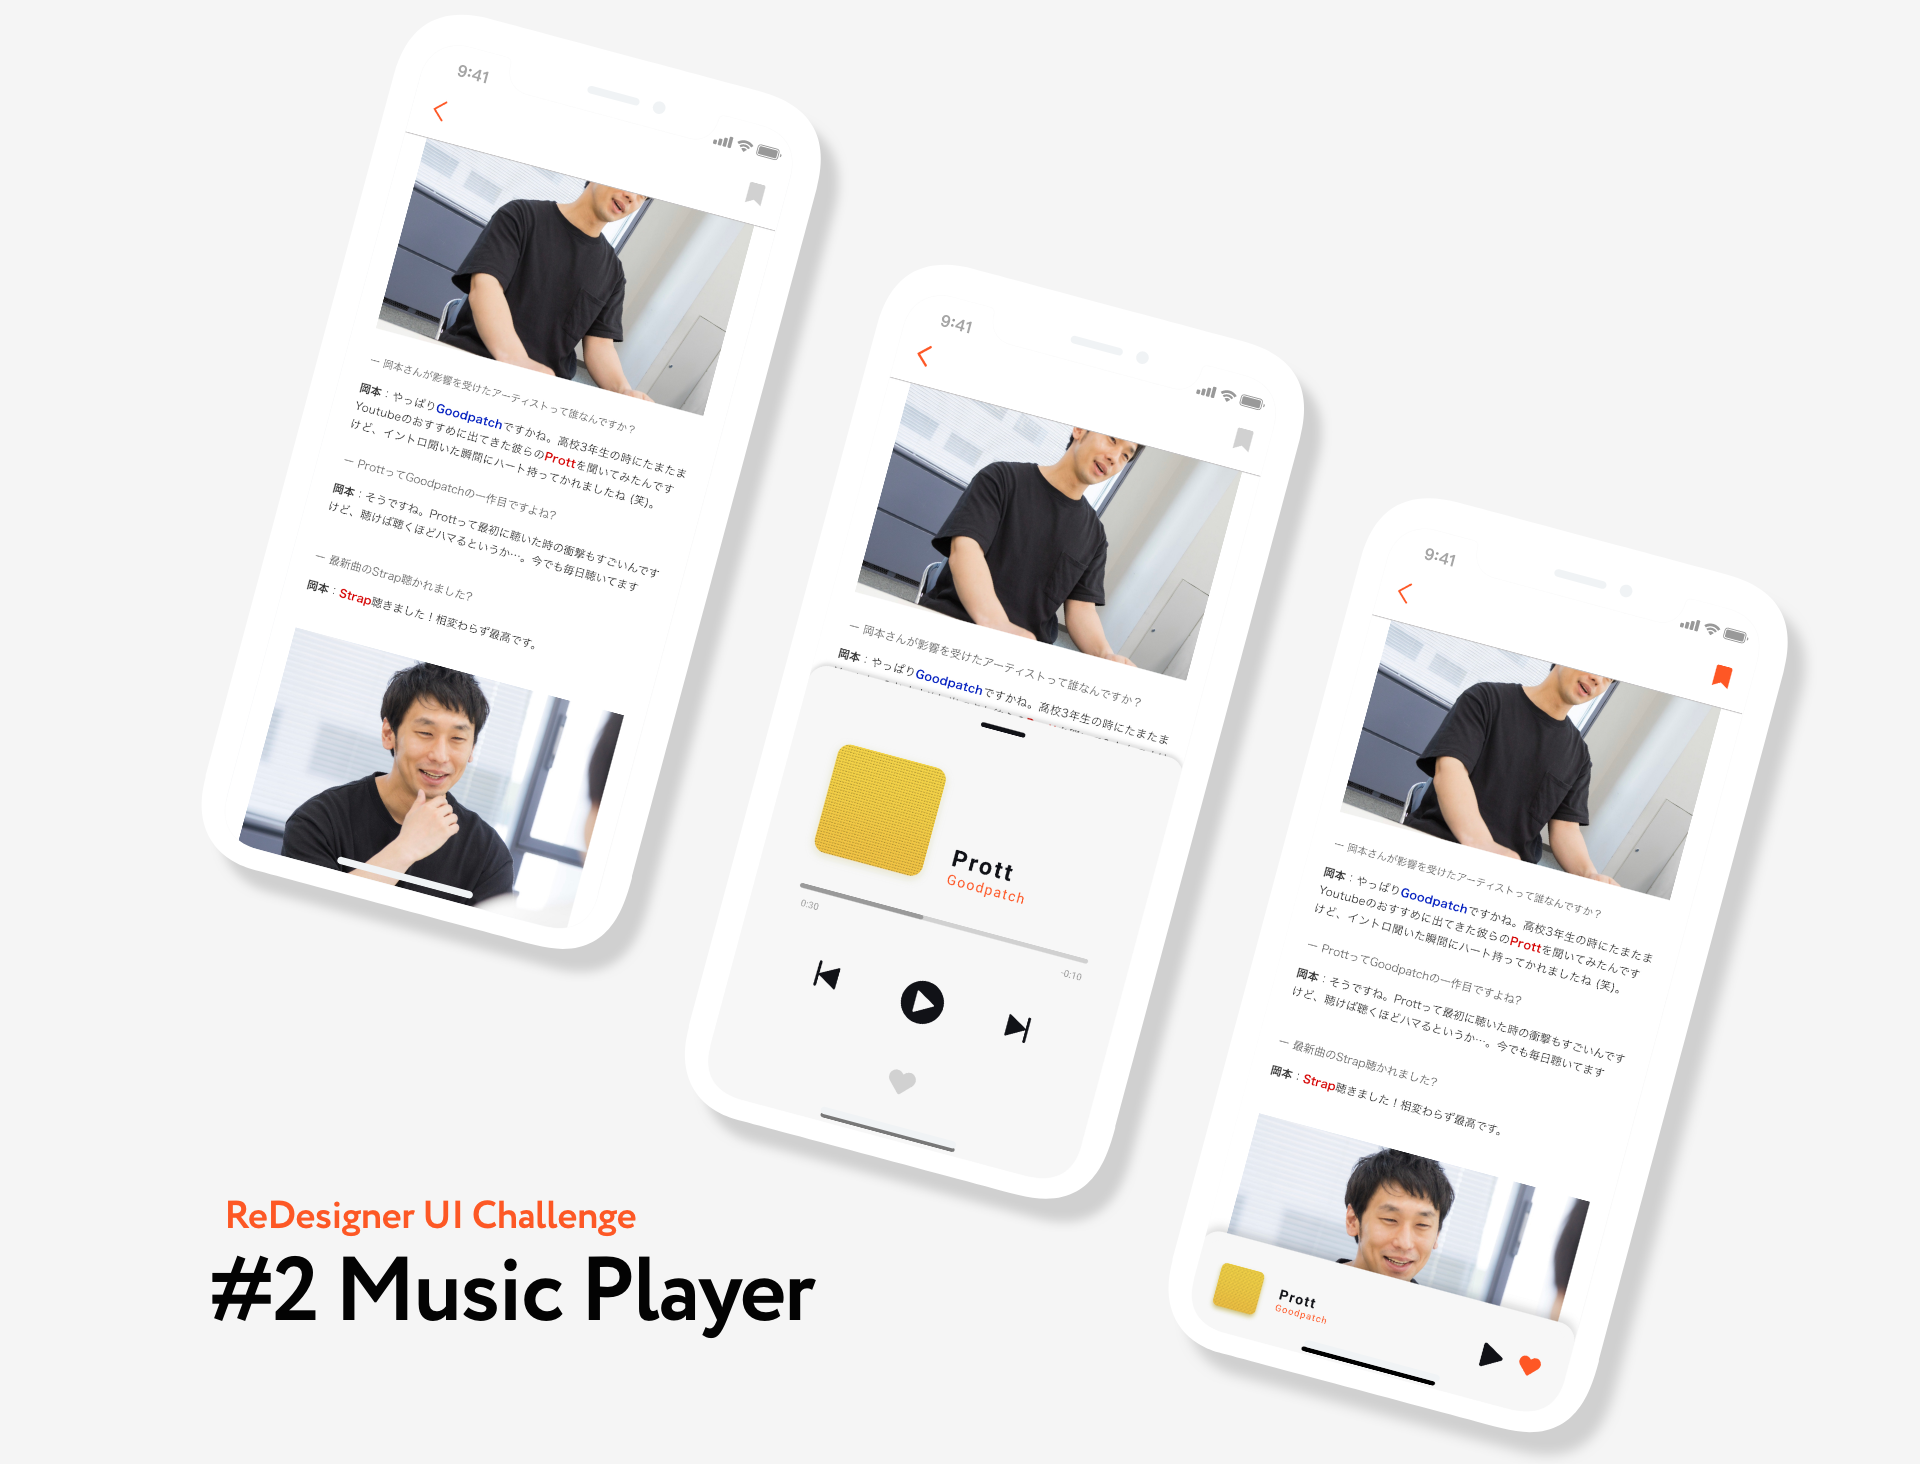 2 Music Player Reds Ui Challenge Webメディア型音楽アプリ By M Y Redesigner For Student